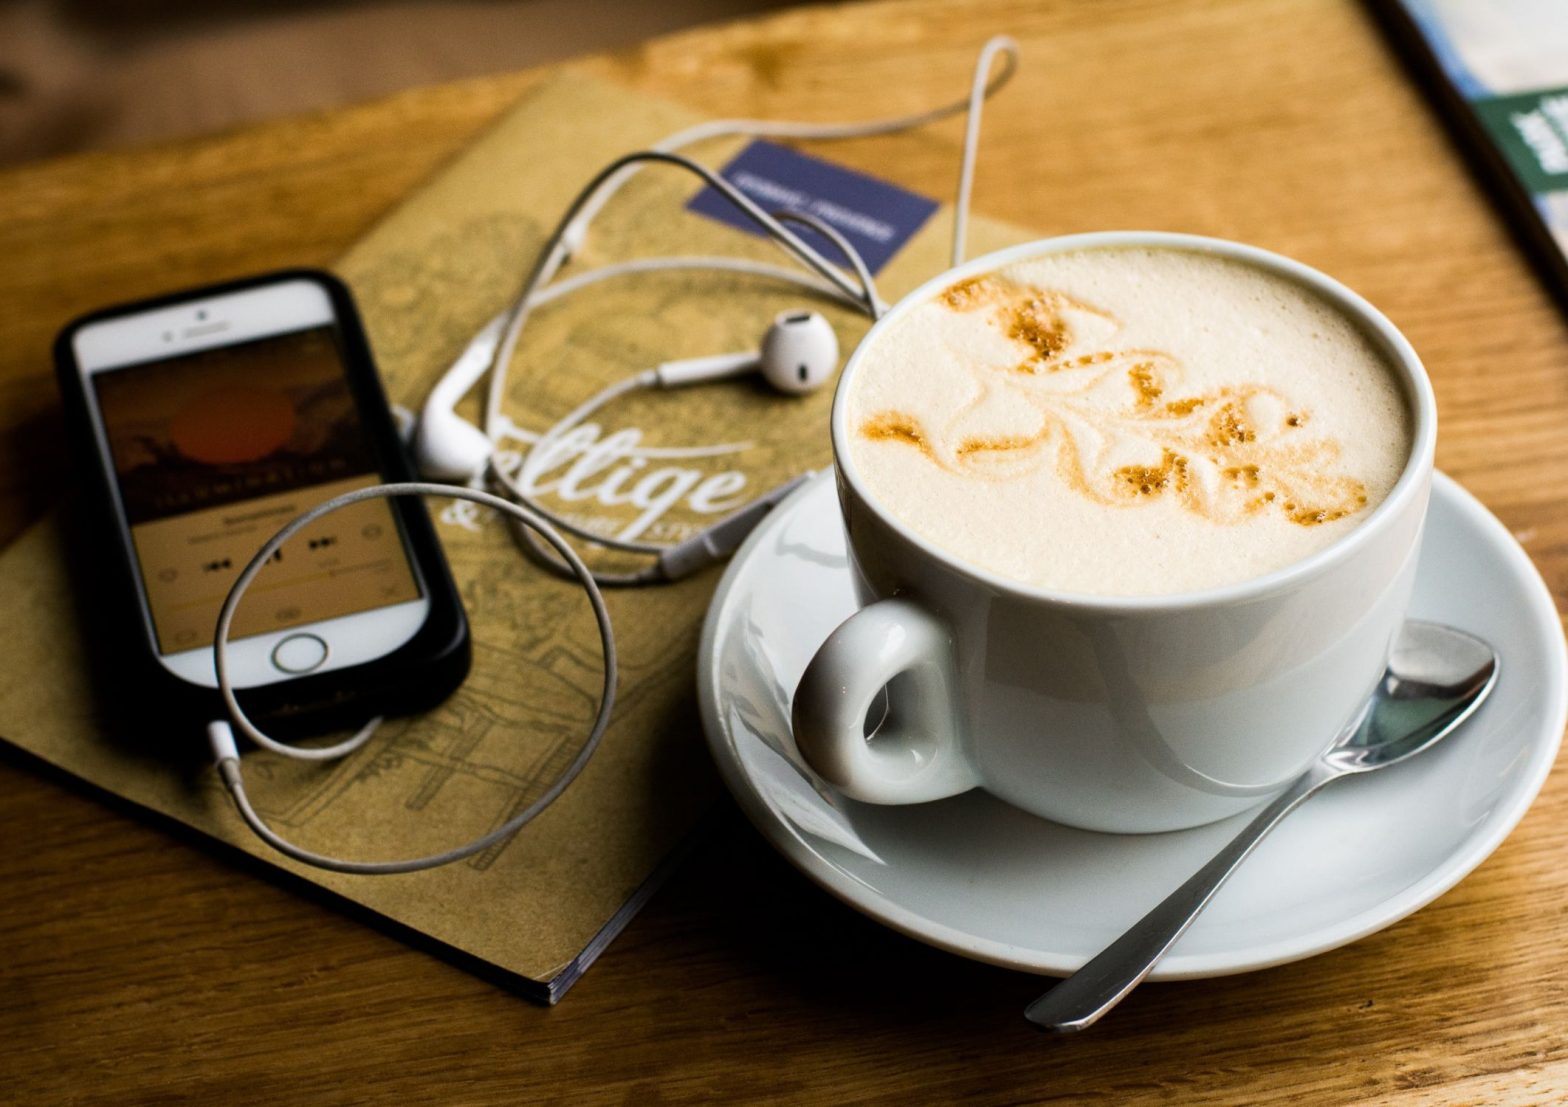 Image shows a fresh cup of coffee beside a mobile phone and ear-phones